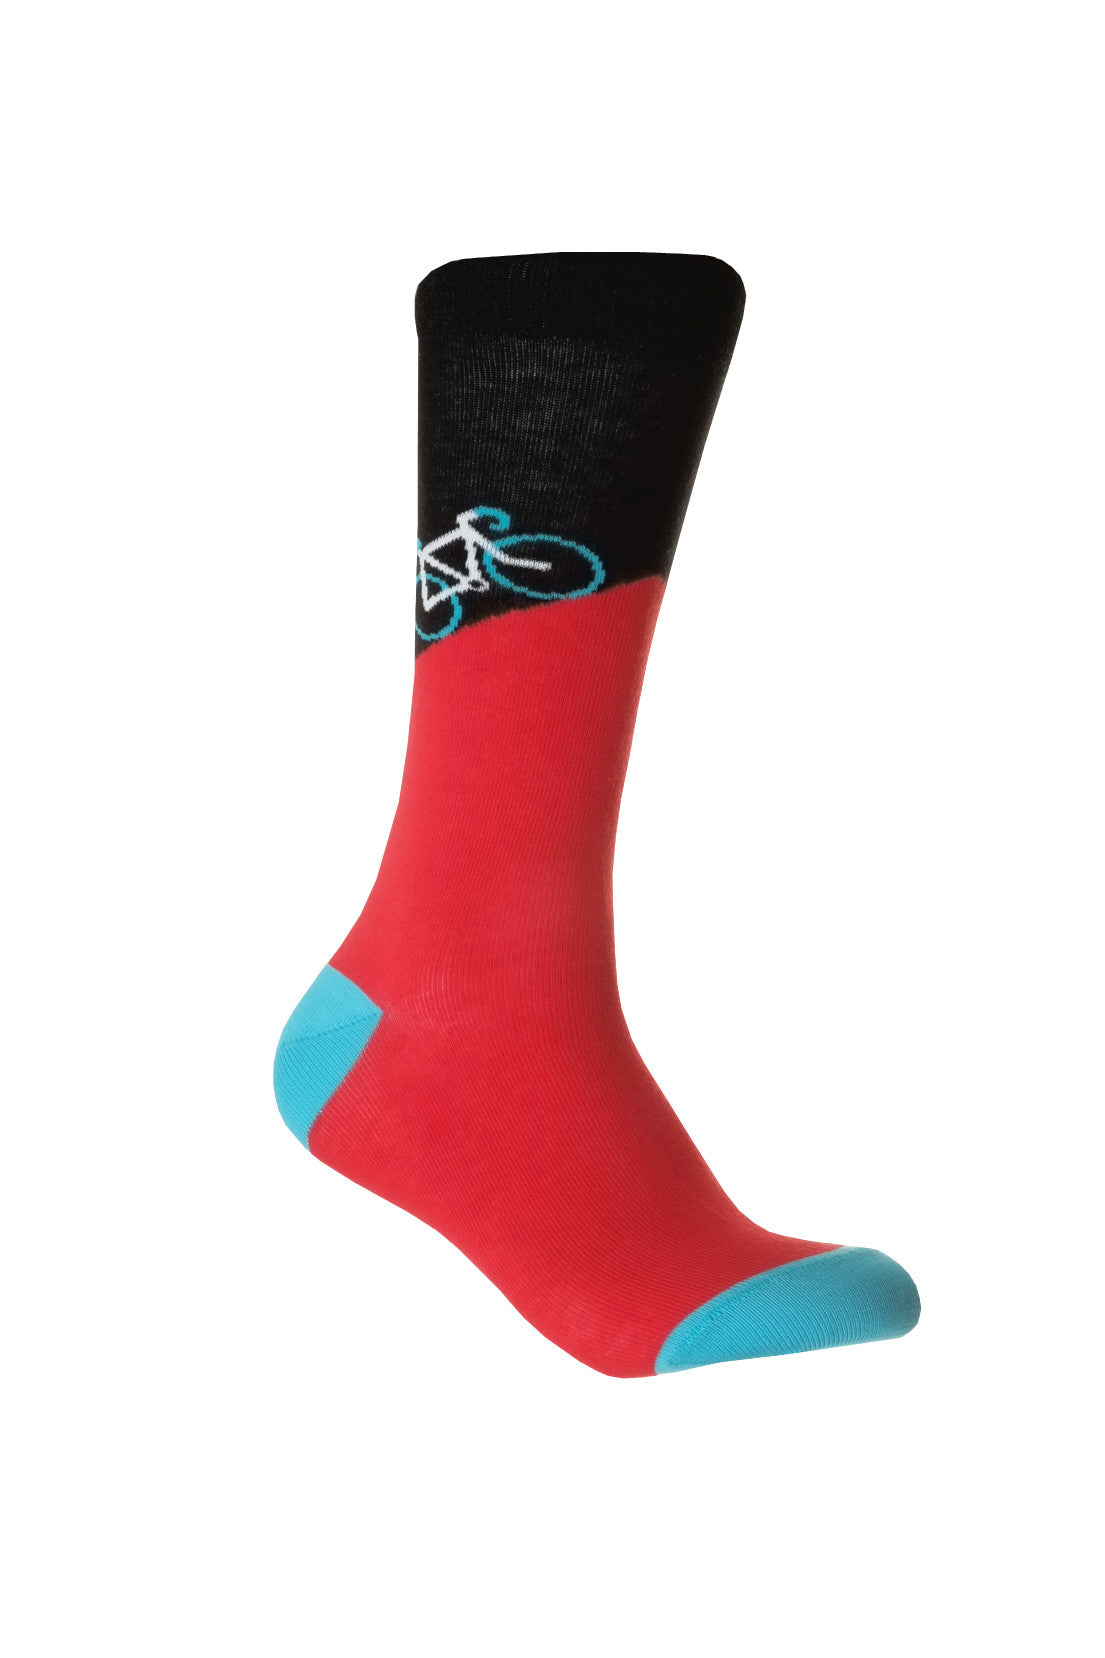 Giraffe Cool | Black And Blue With White Bicycles Brushed Cotton Socks Foot Front